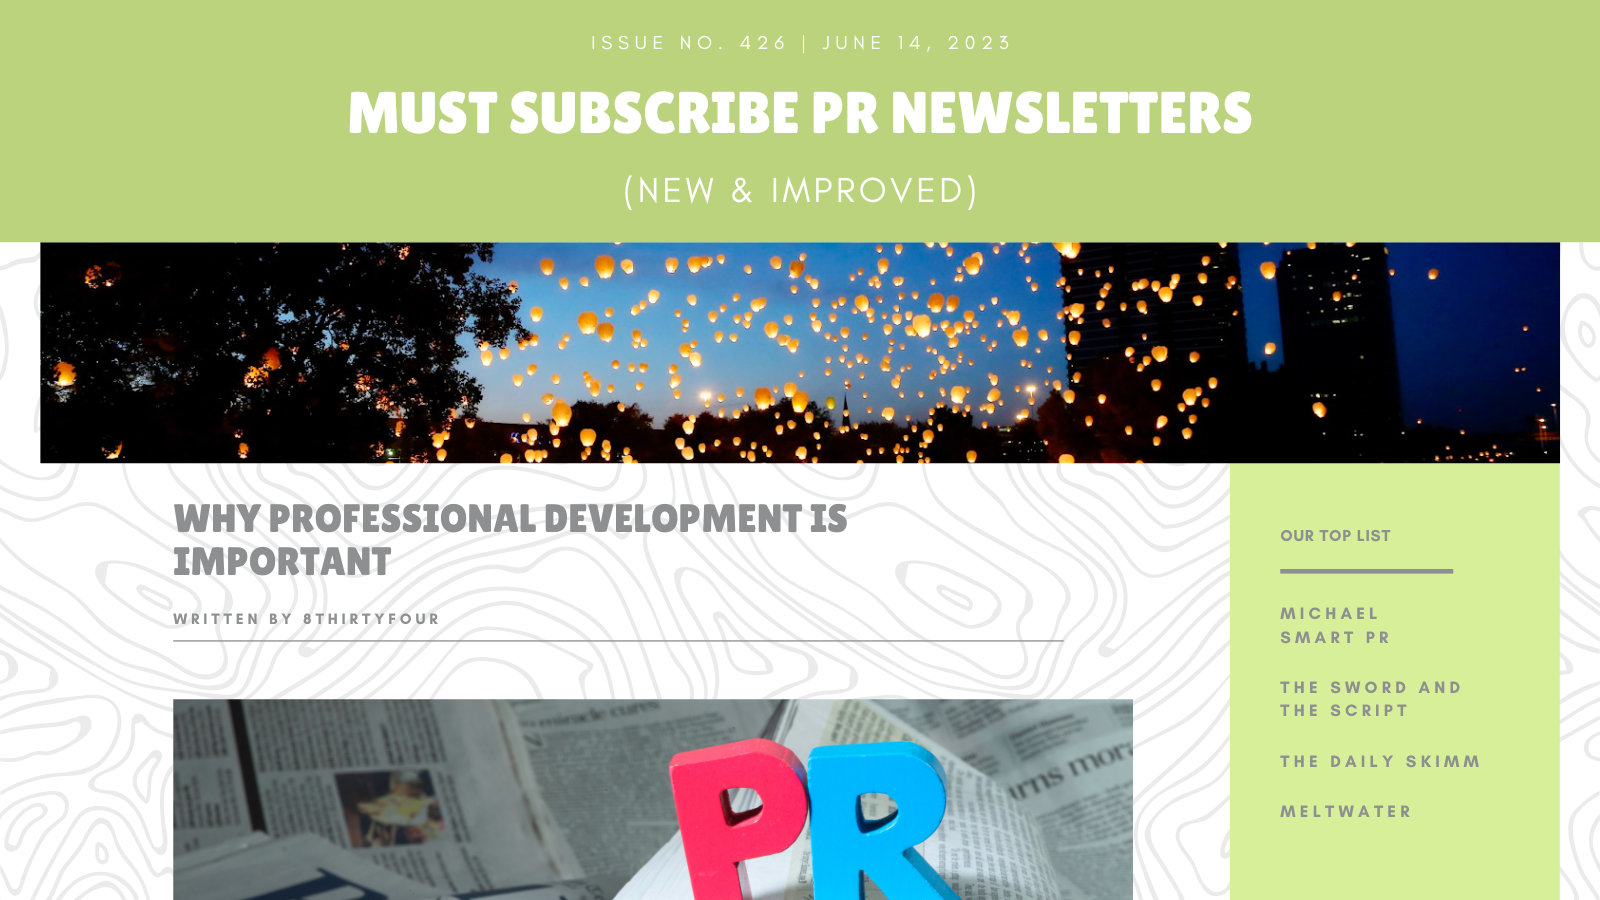 A newsletter format with the title "Must Subscribe PR Newsletters"